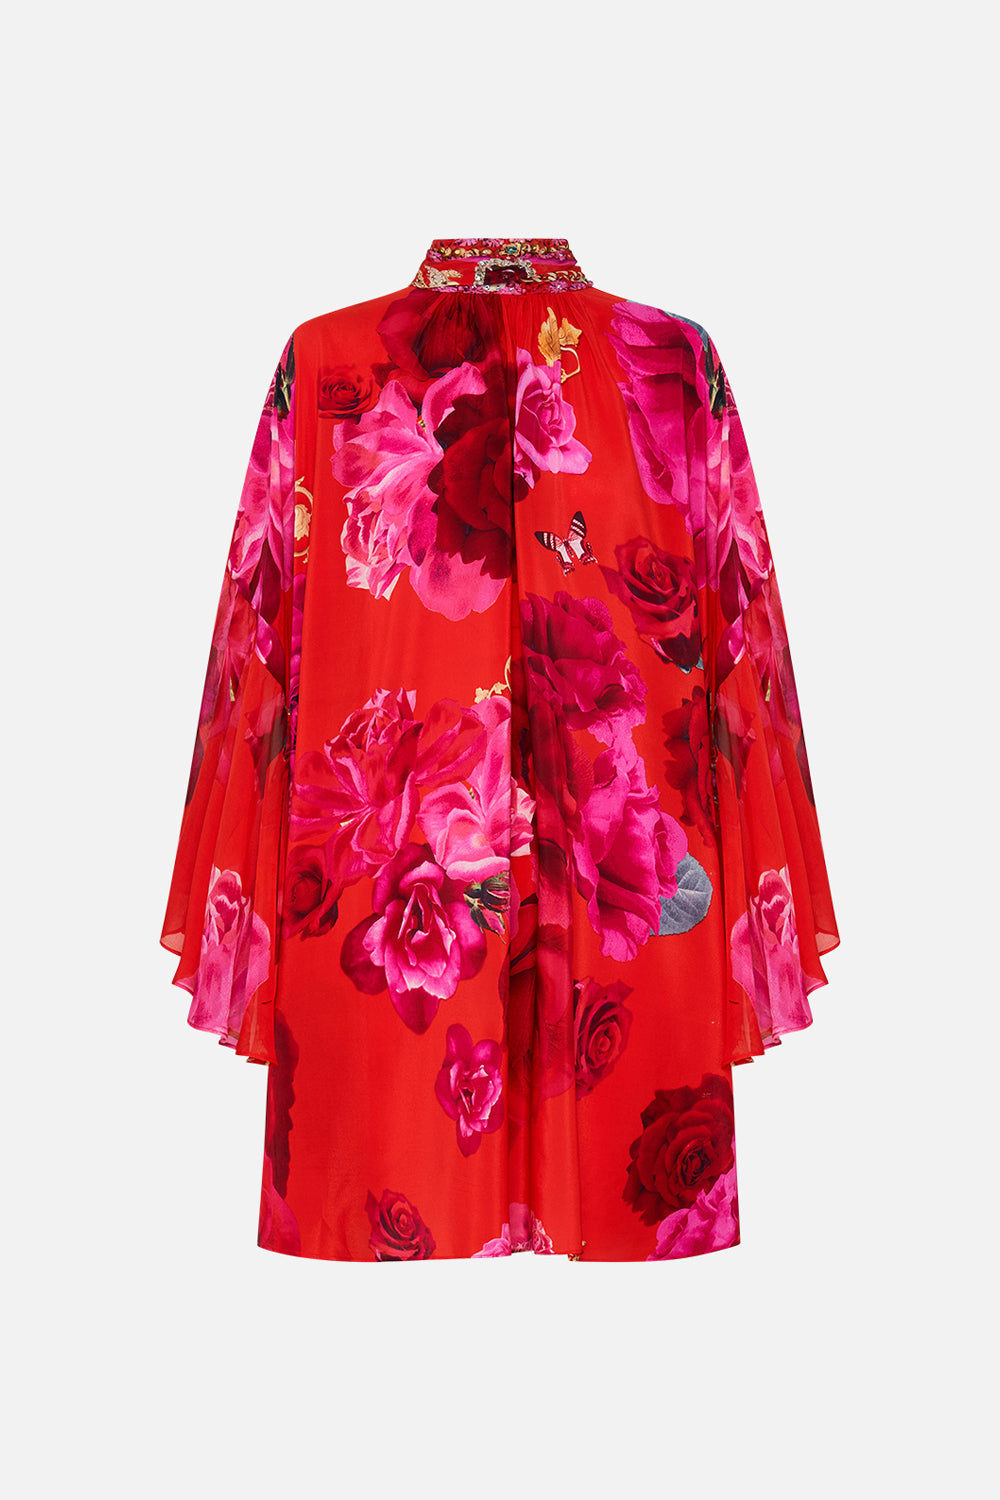 Product view of CAMILLA high neck silk dress in An Italian Rosa print